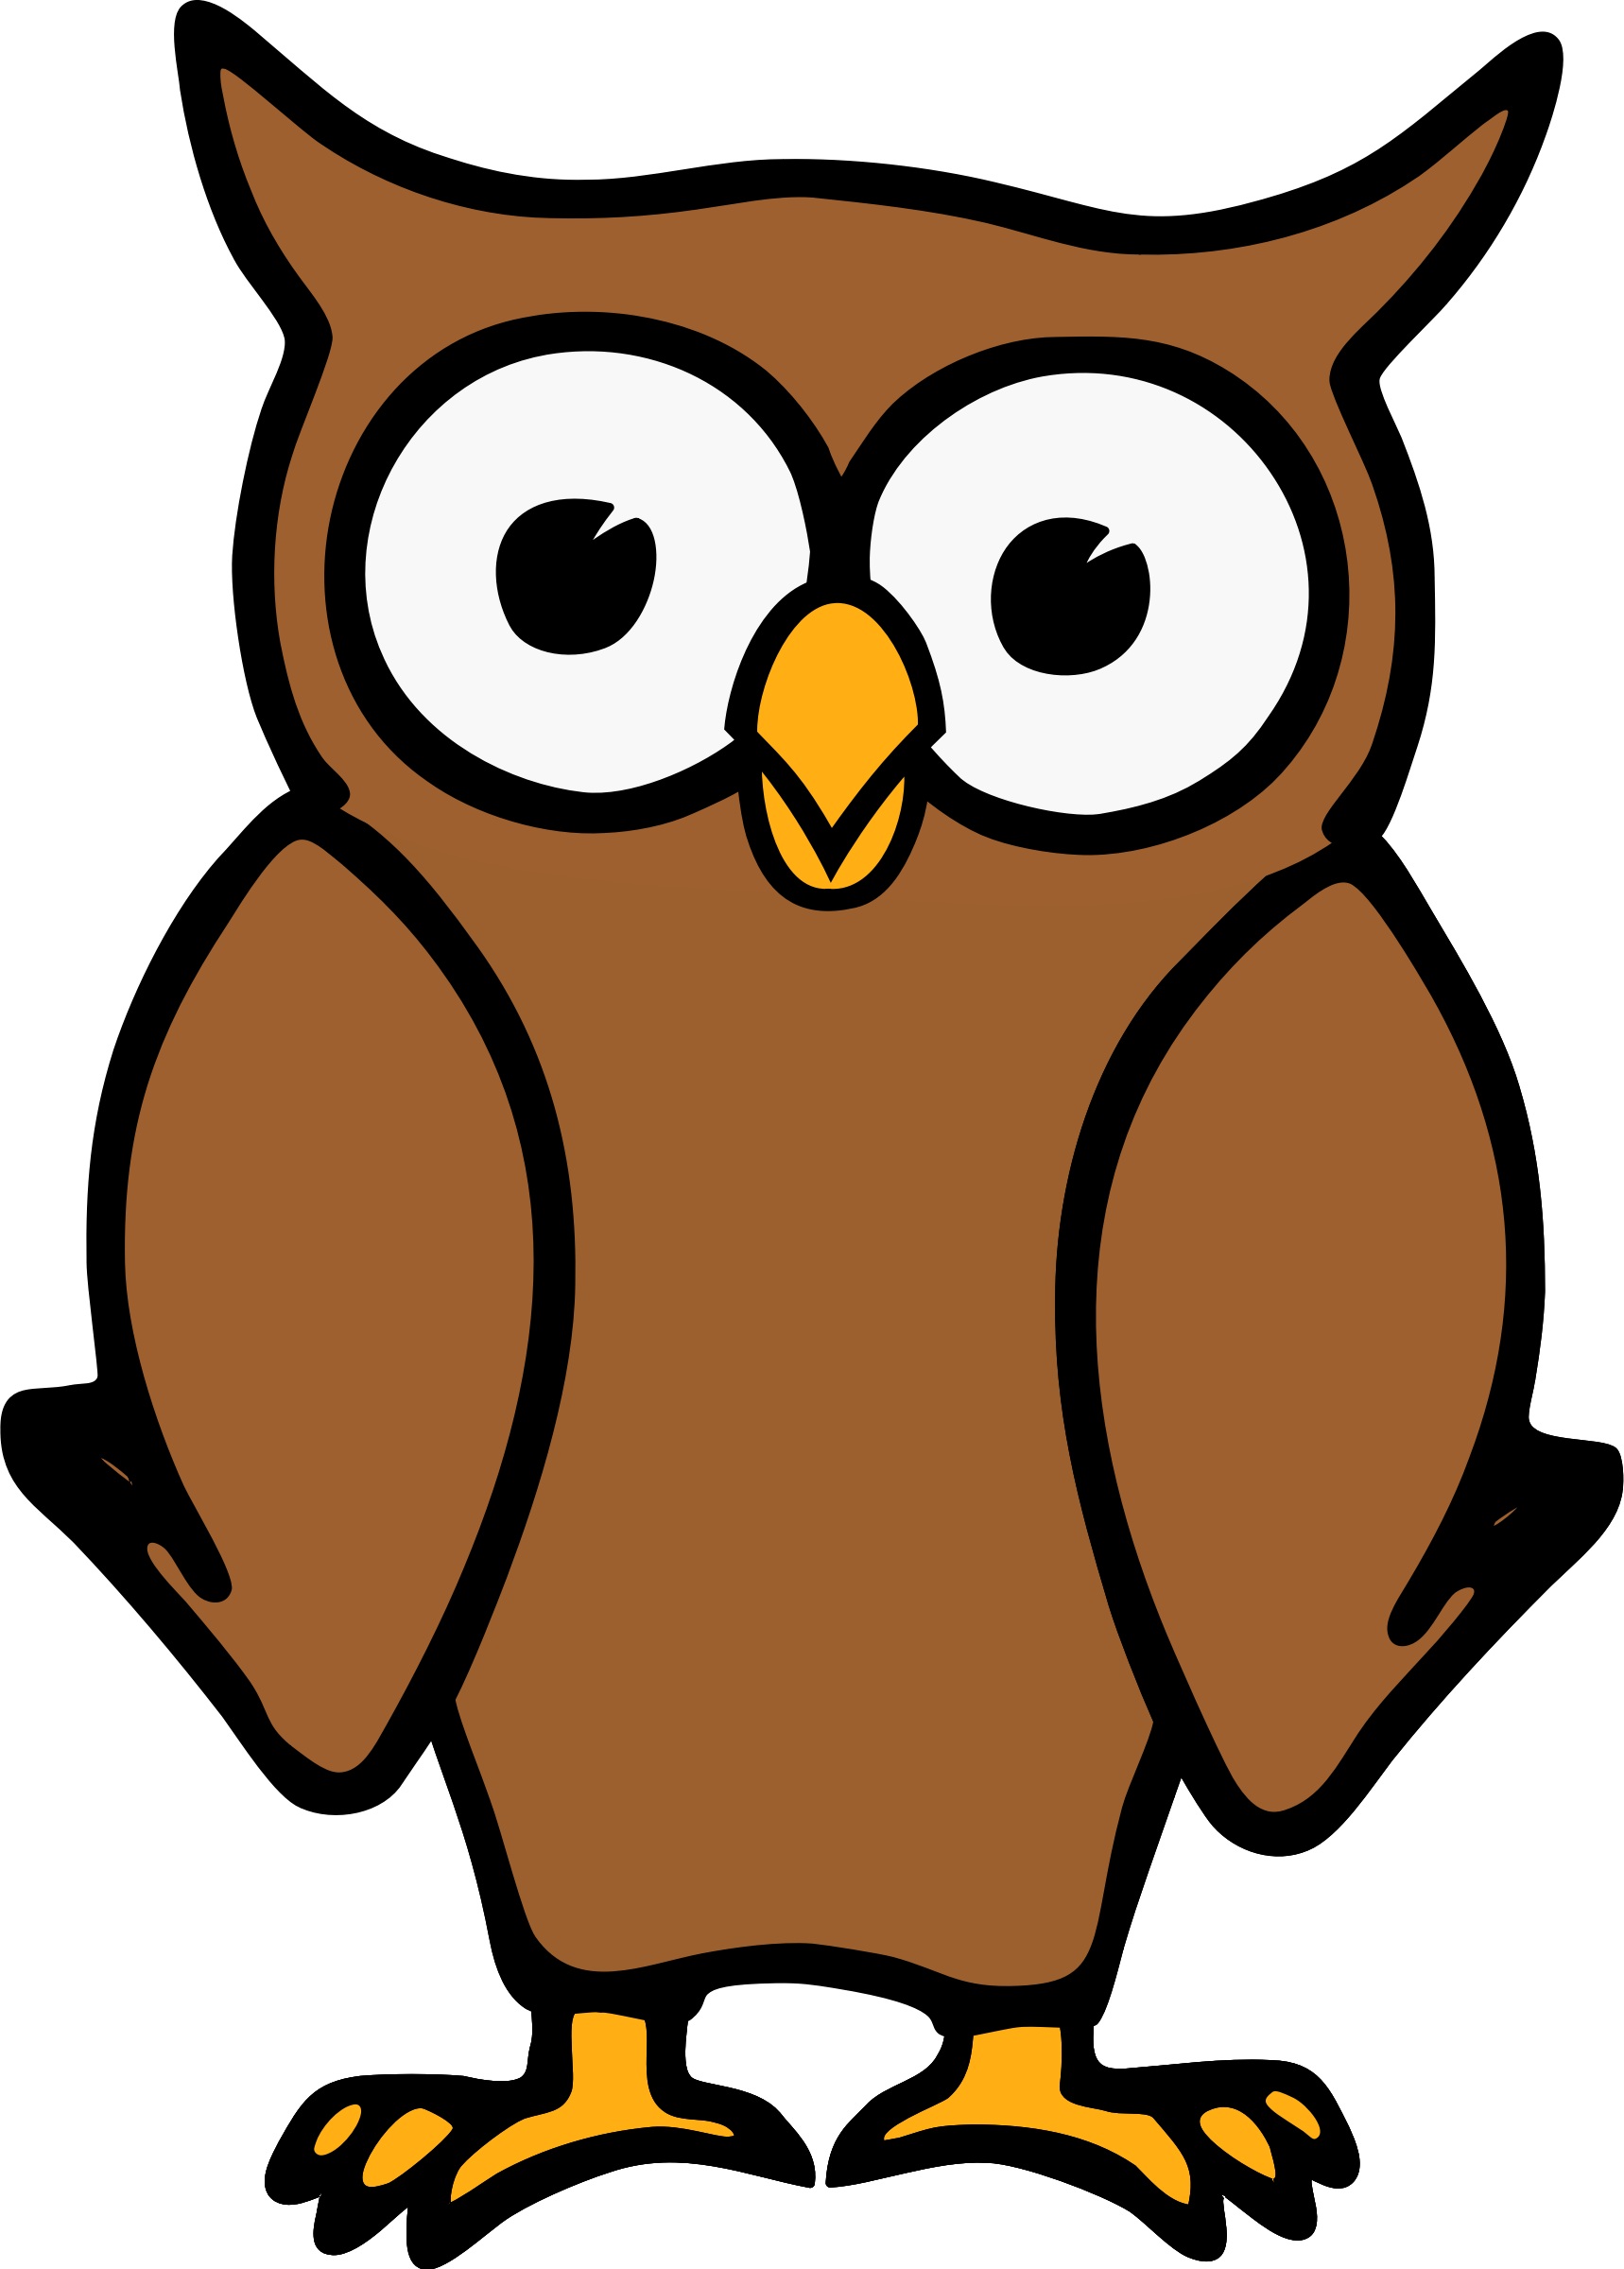 Clipart Of Owl - Clip Art Image Of Owl (1718x2400)